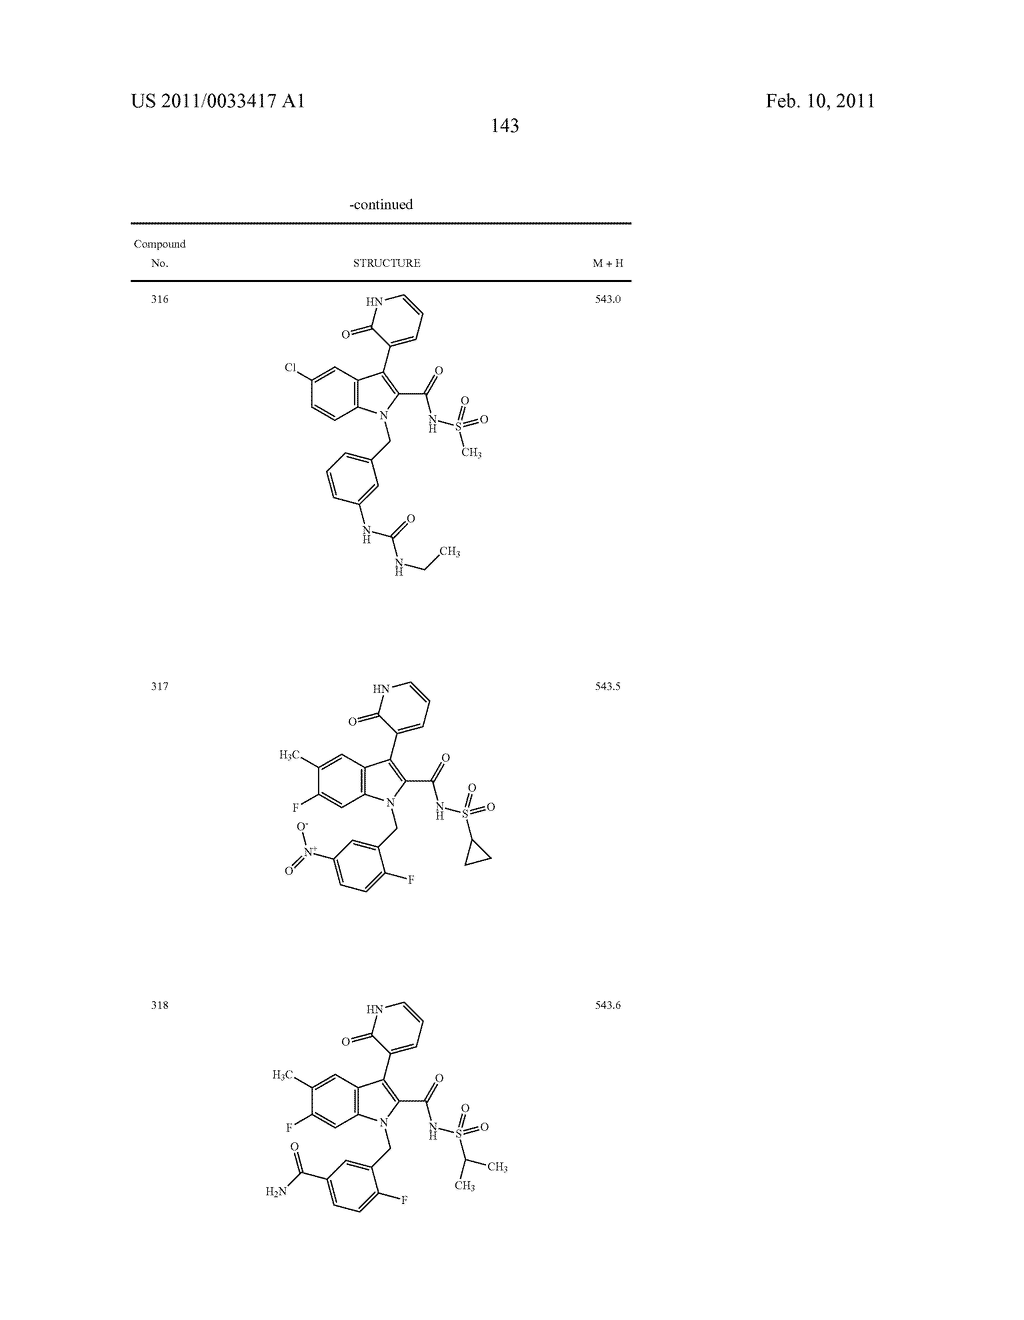 2,3-SUBSTITUTED INDOLE DERIVATIVES FOR TREATING VIRAL INFECTIONS - diagram, schematic, and image 144